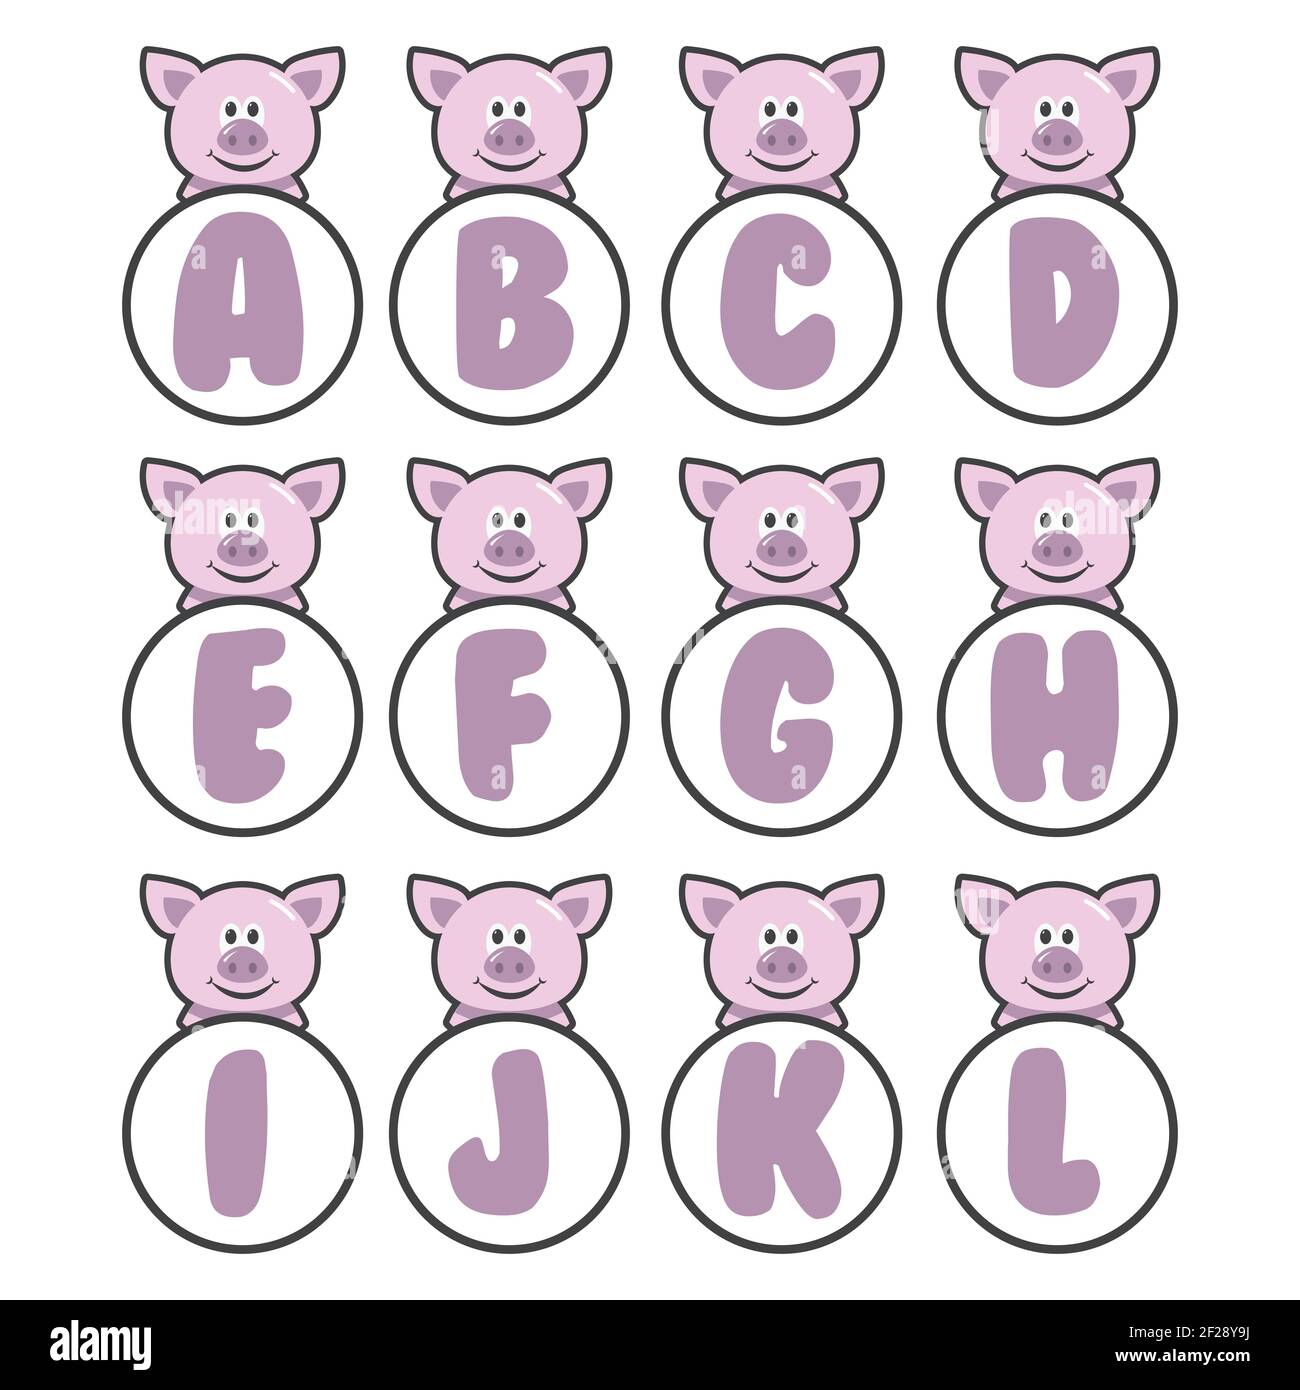 Pig alphabet collection, vector art and illustration. Stock Vector